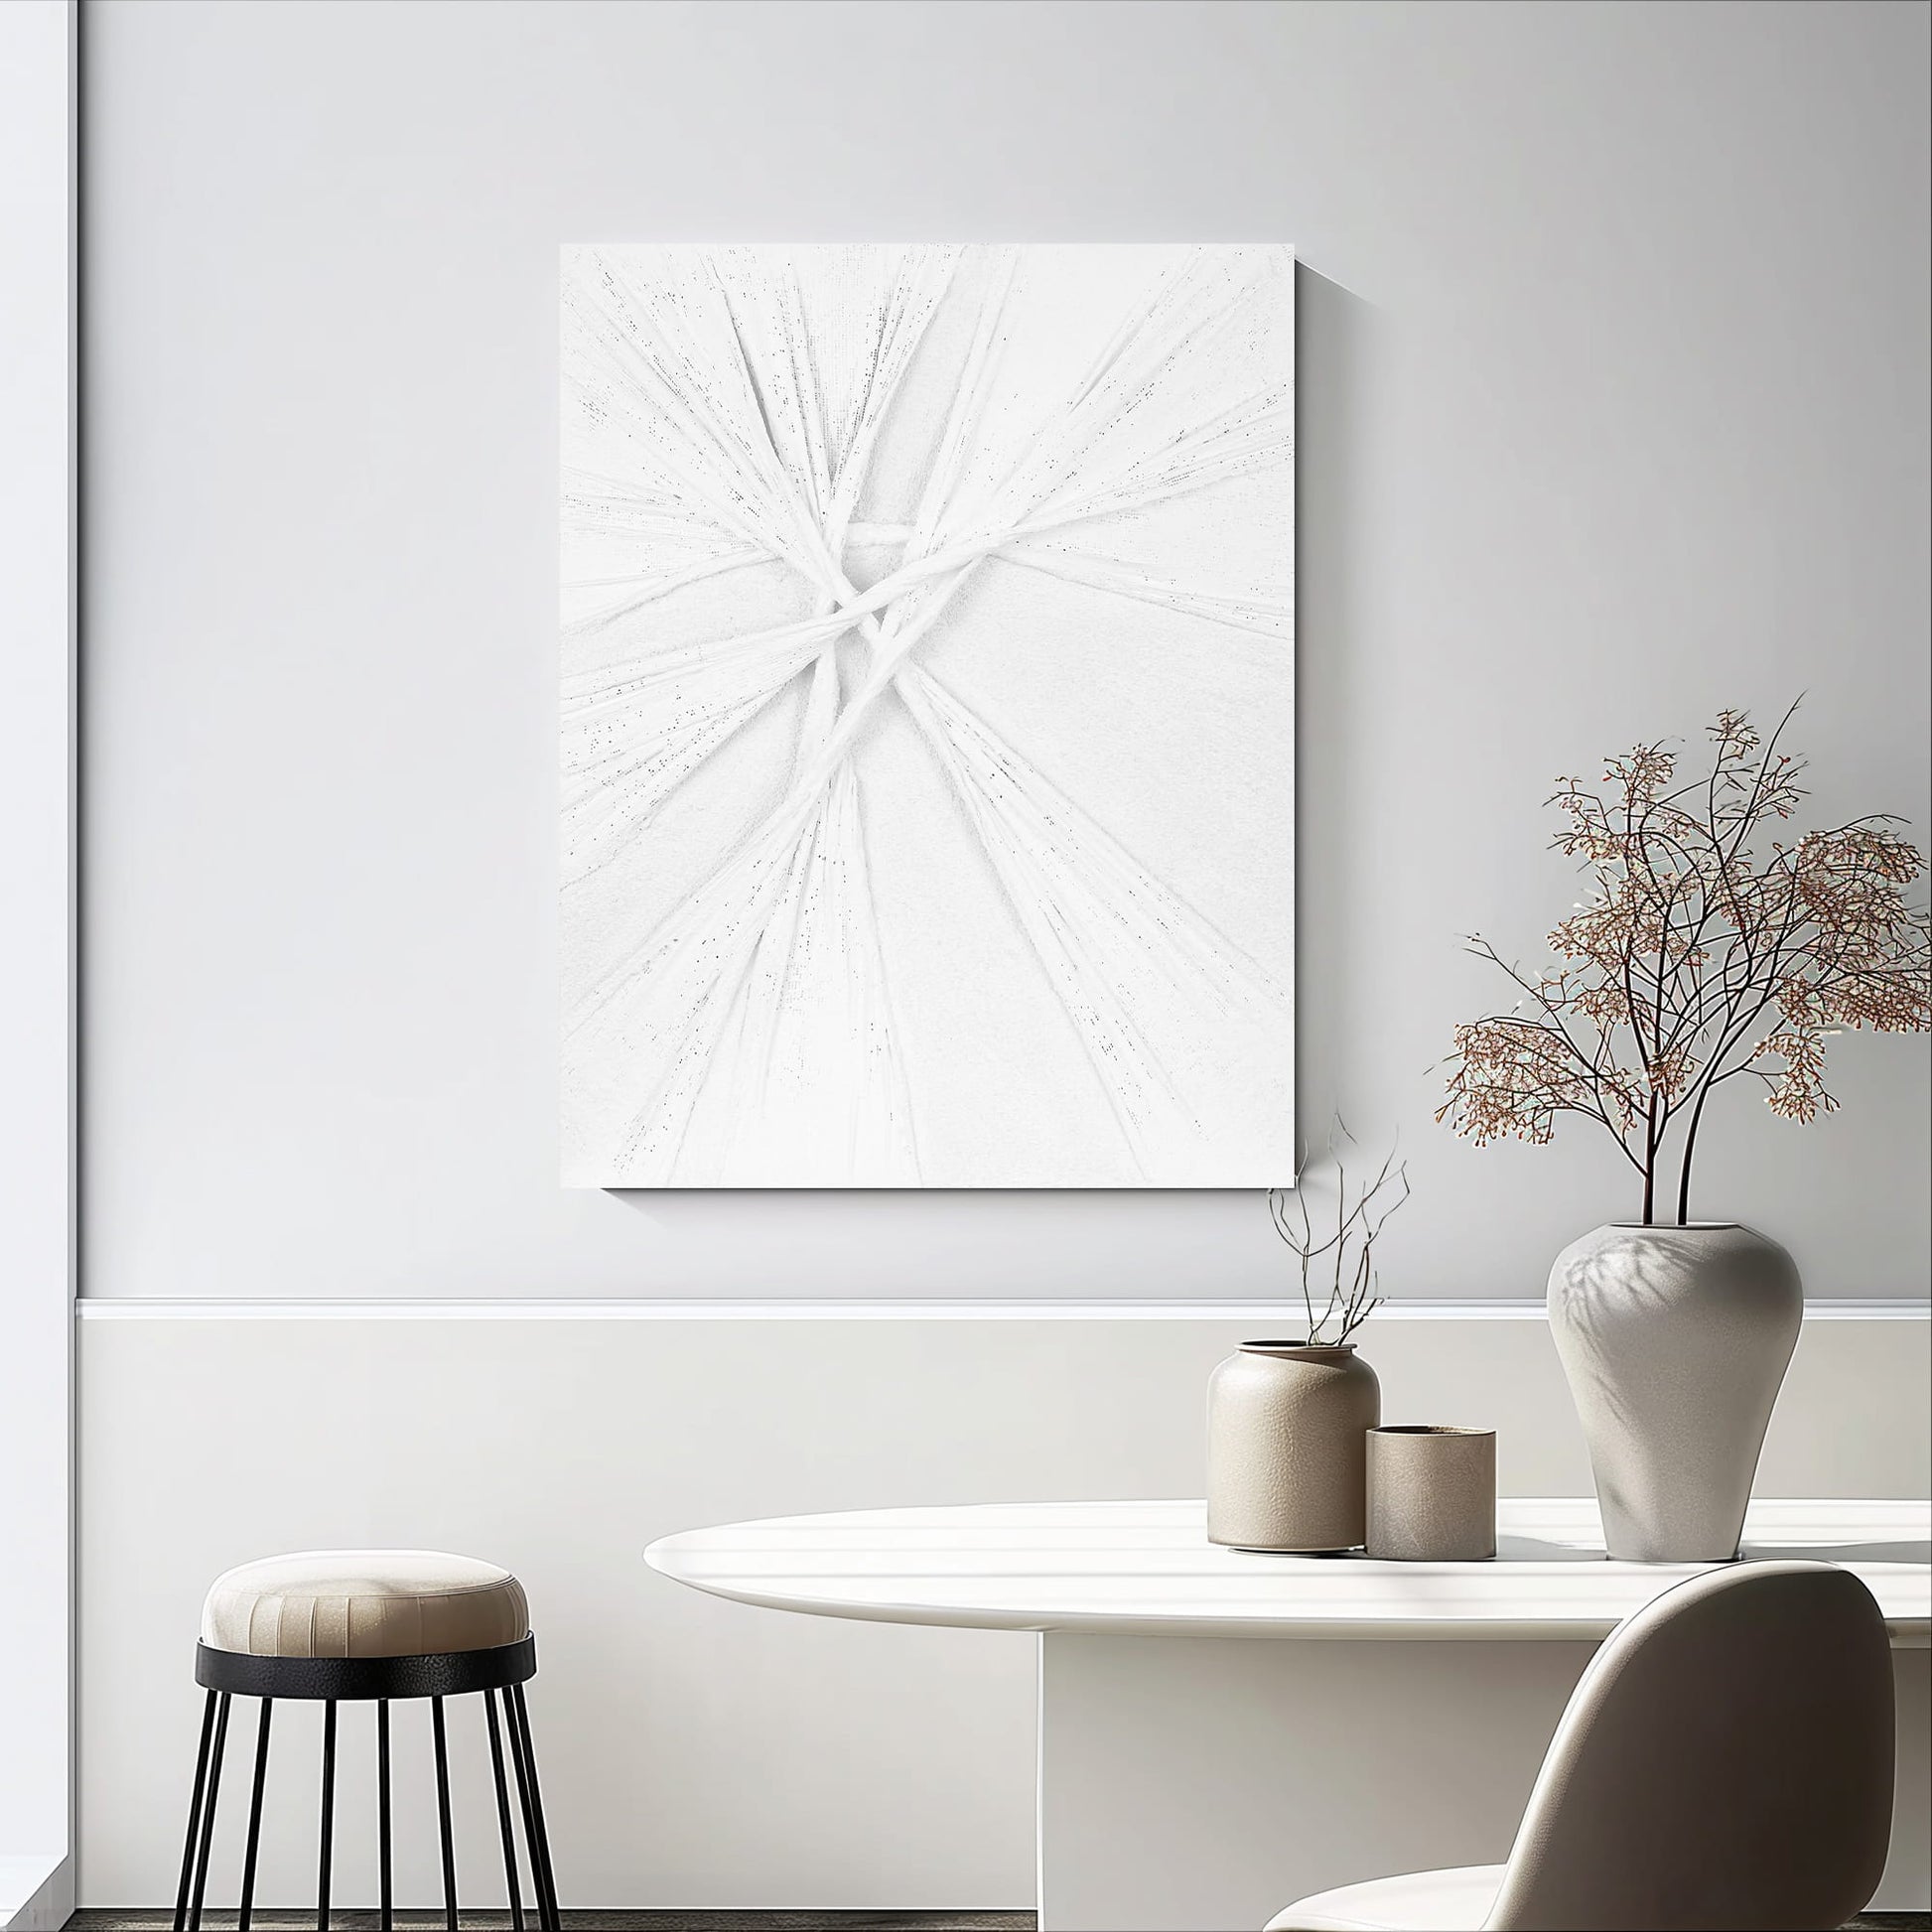 "INFINITE KNOTS: Hand-painted Portrait shape abstract texture wall art painting with a three-dimensional feel, in shades of white, hanging on the wall in the dining room."